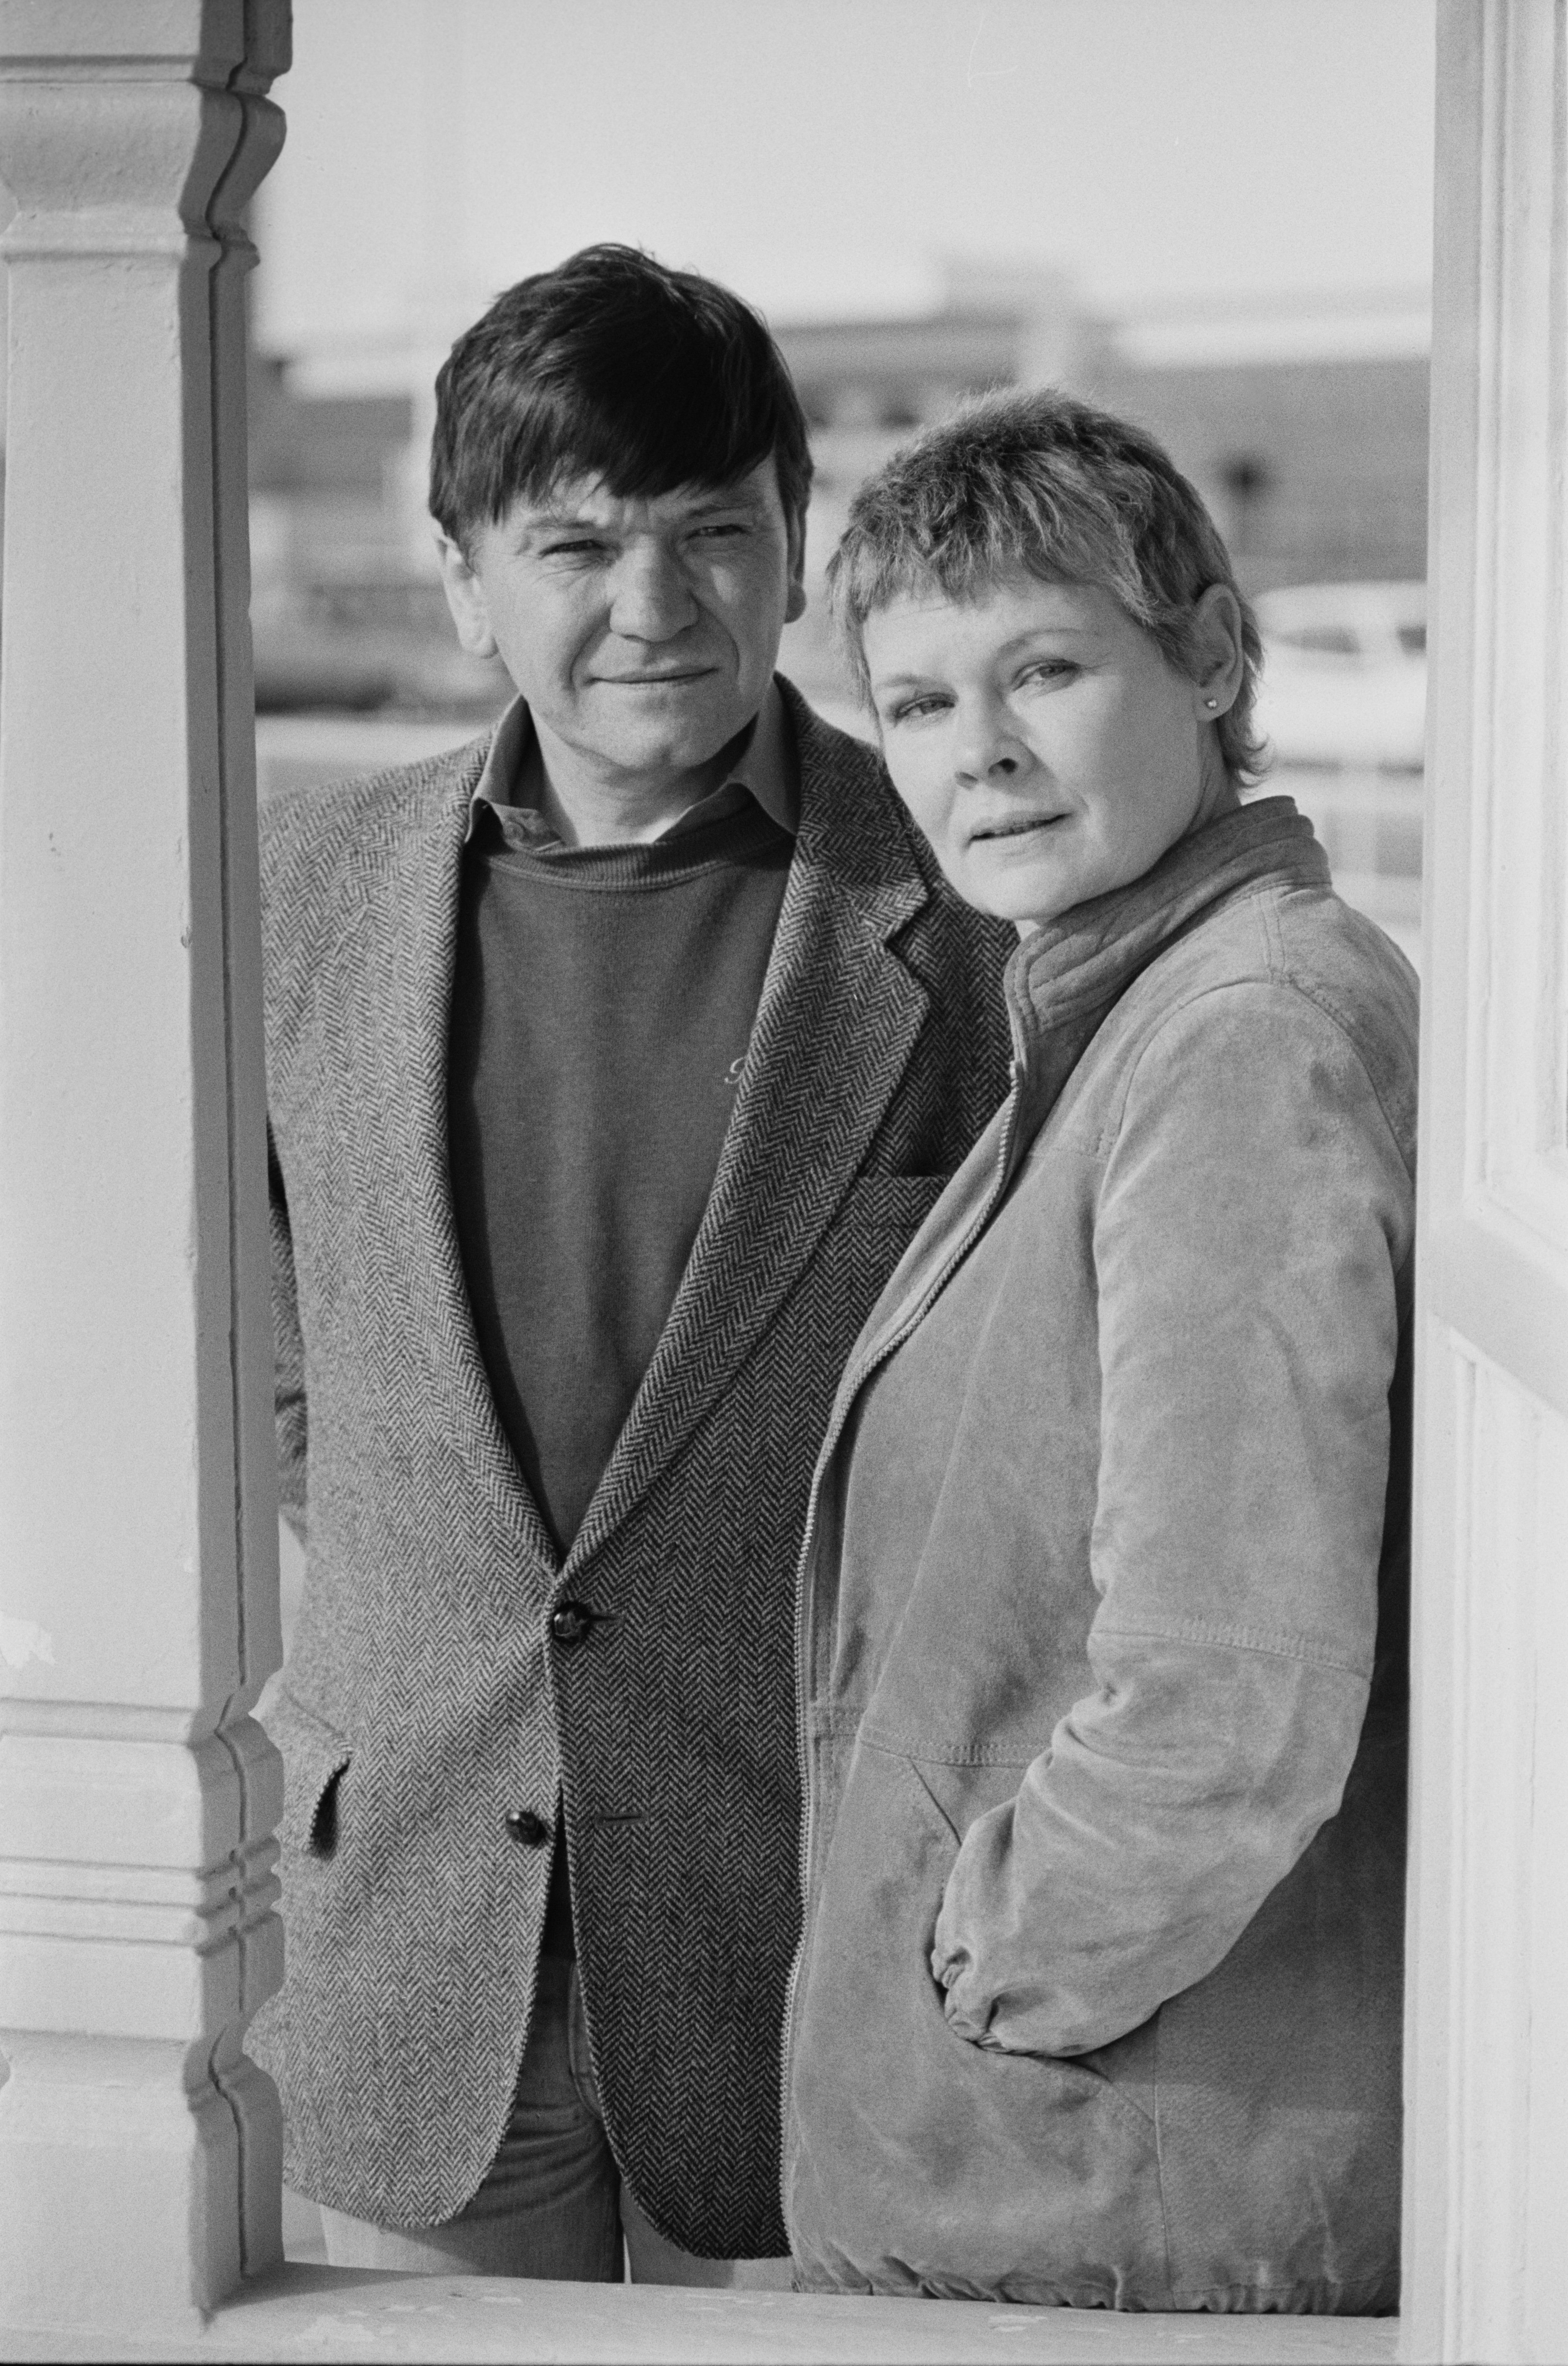 Michael Williams and his wife Judi Dench photographed on October 18, 1983 in the United Kingdom ┃Source: Getty Images